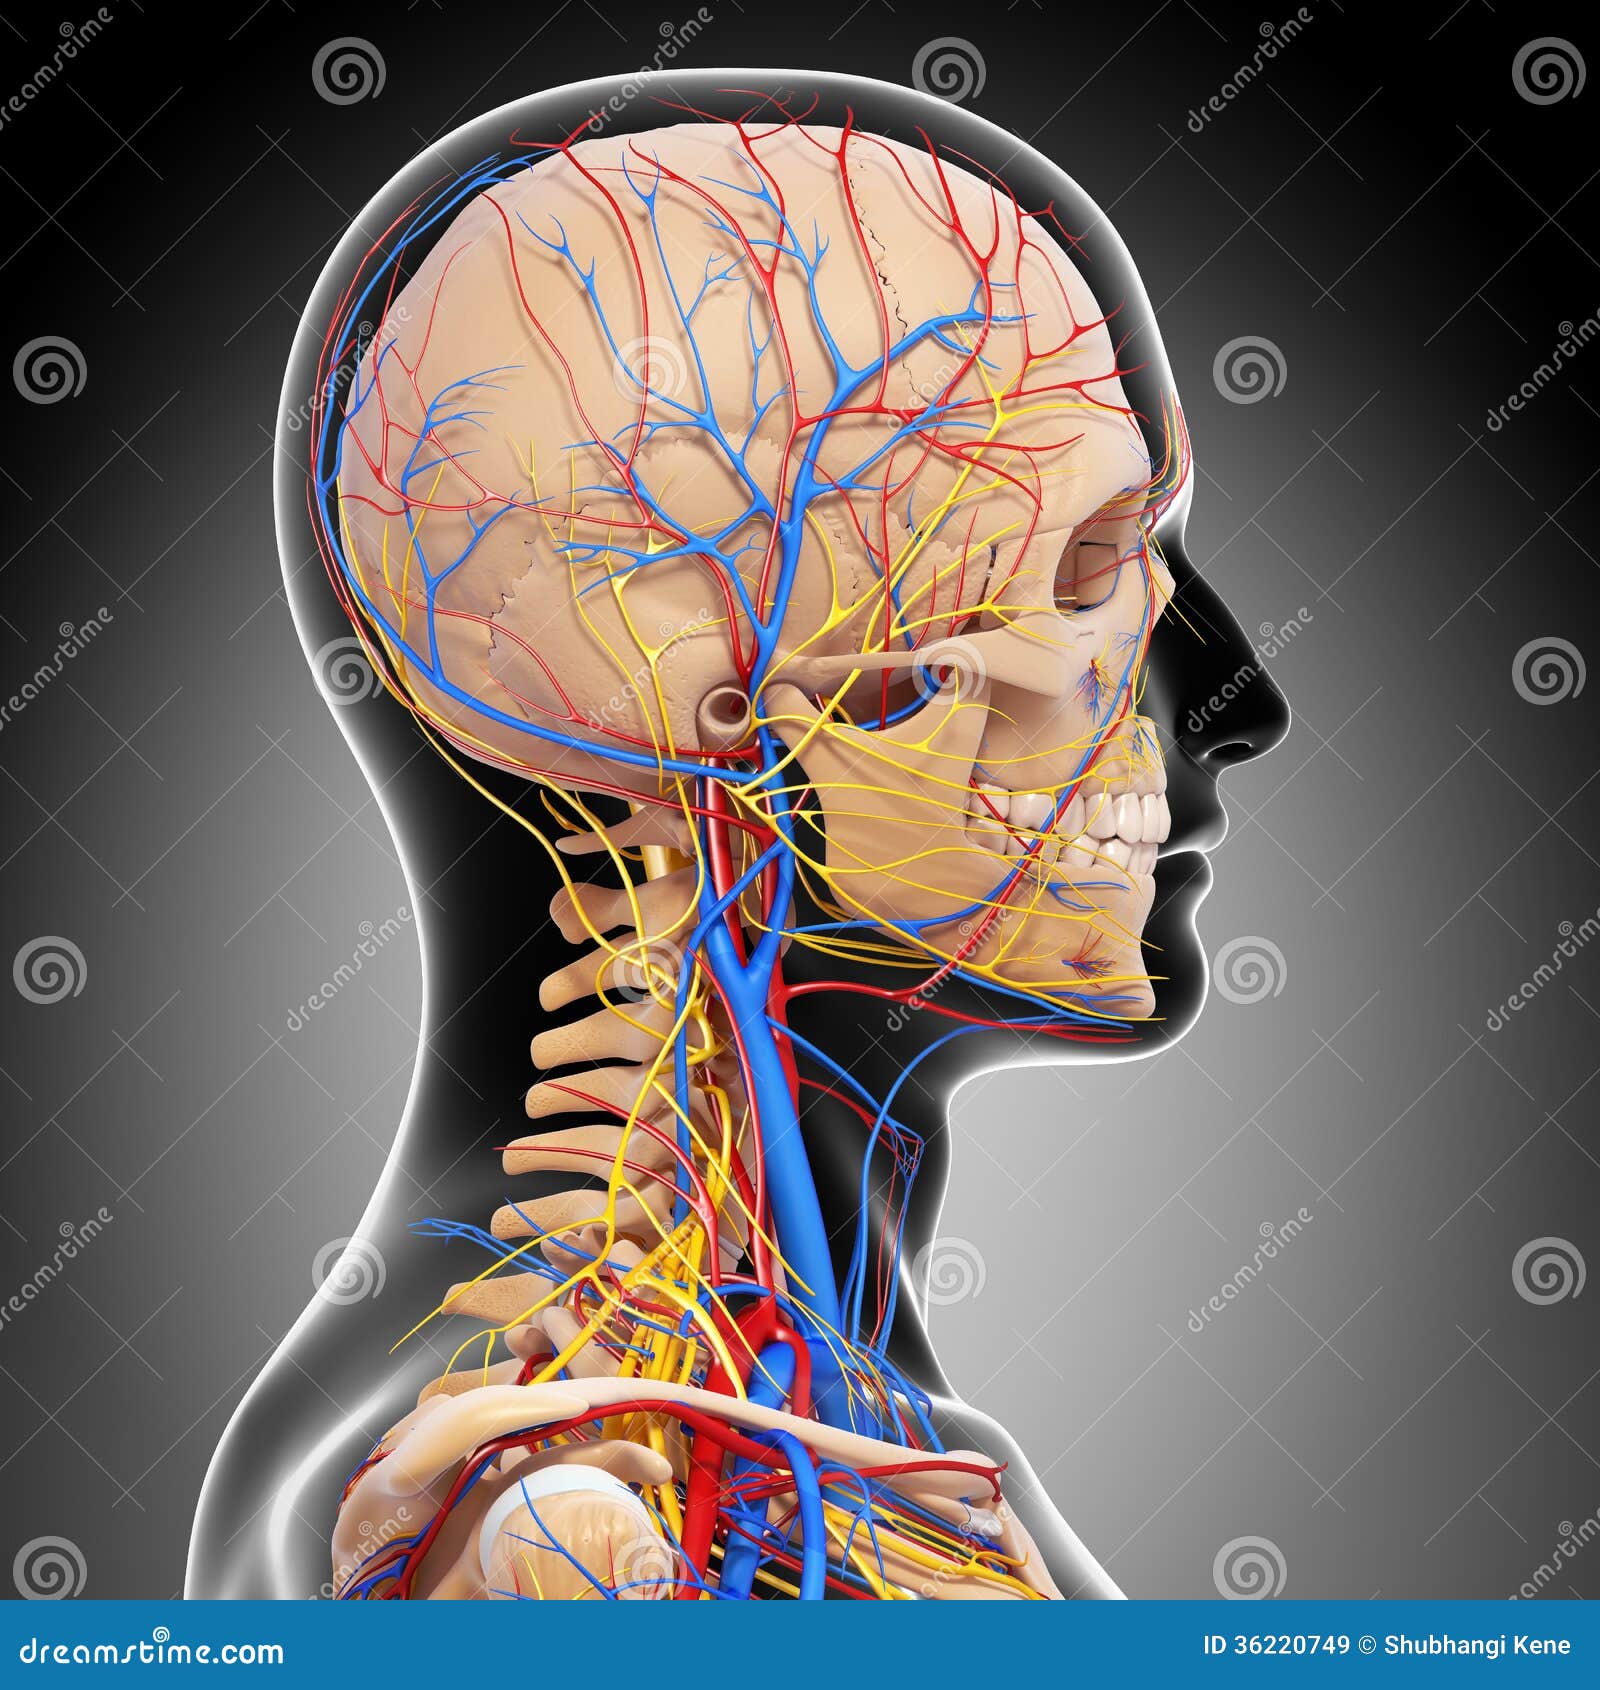 Circulatory And Nervous System Of Head Royalty Free Stock Images